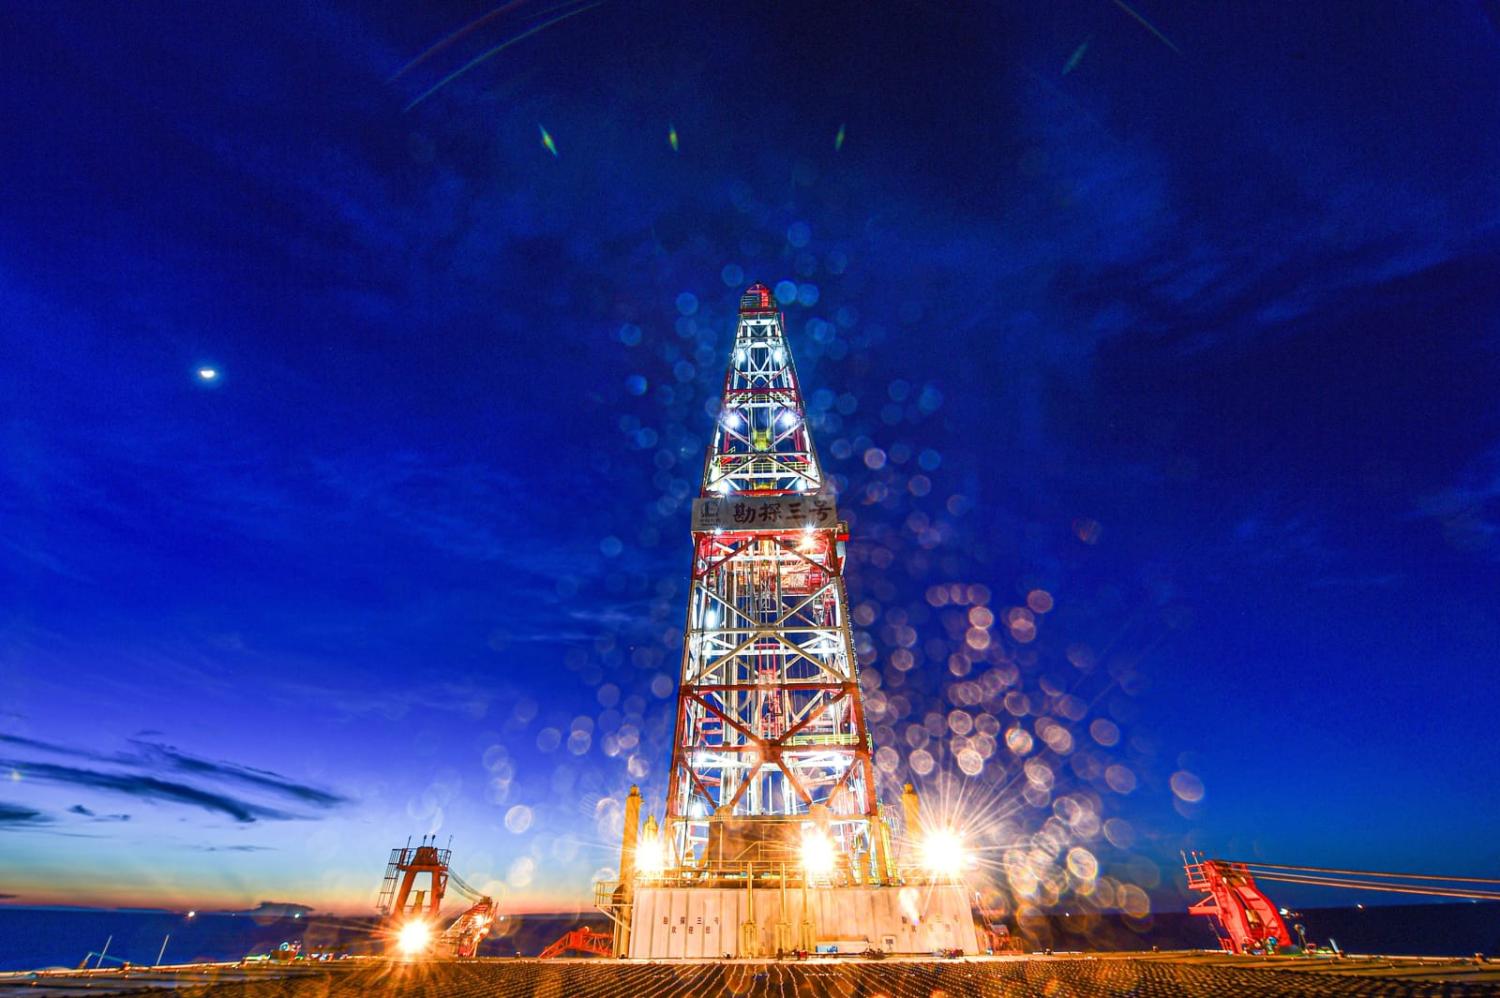 Well-drilling facilities on the Kantan No.3 offshore oil platform in the northern waters of the South China Sea, 2020 (Pu Xiaoxu/Xinhua via Getty Images)